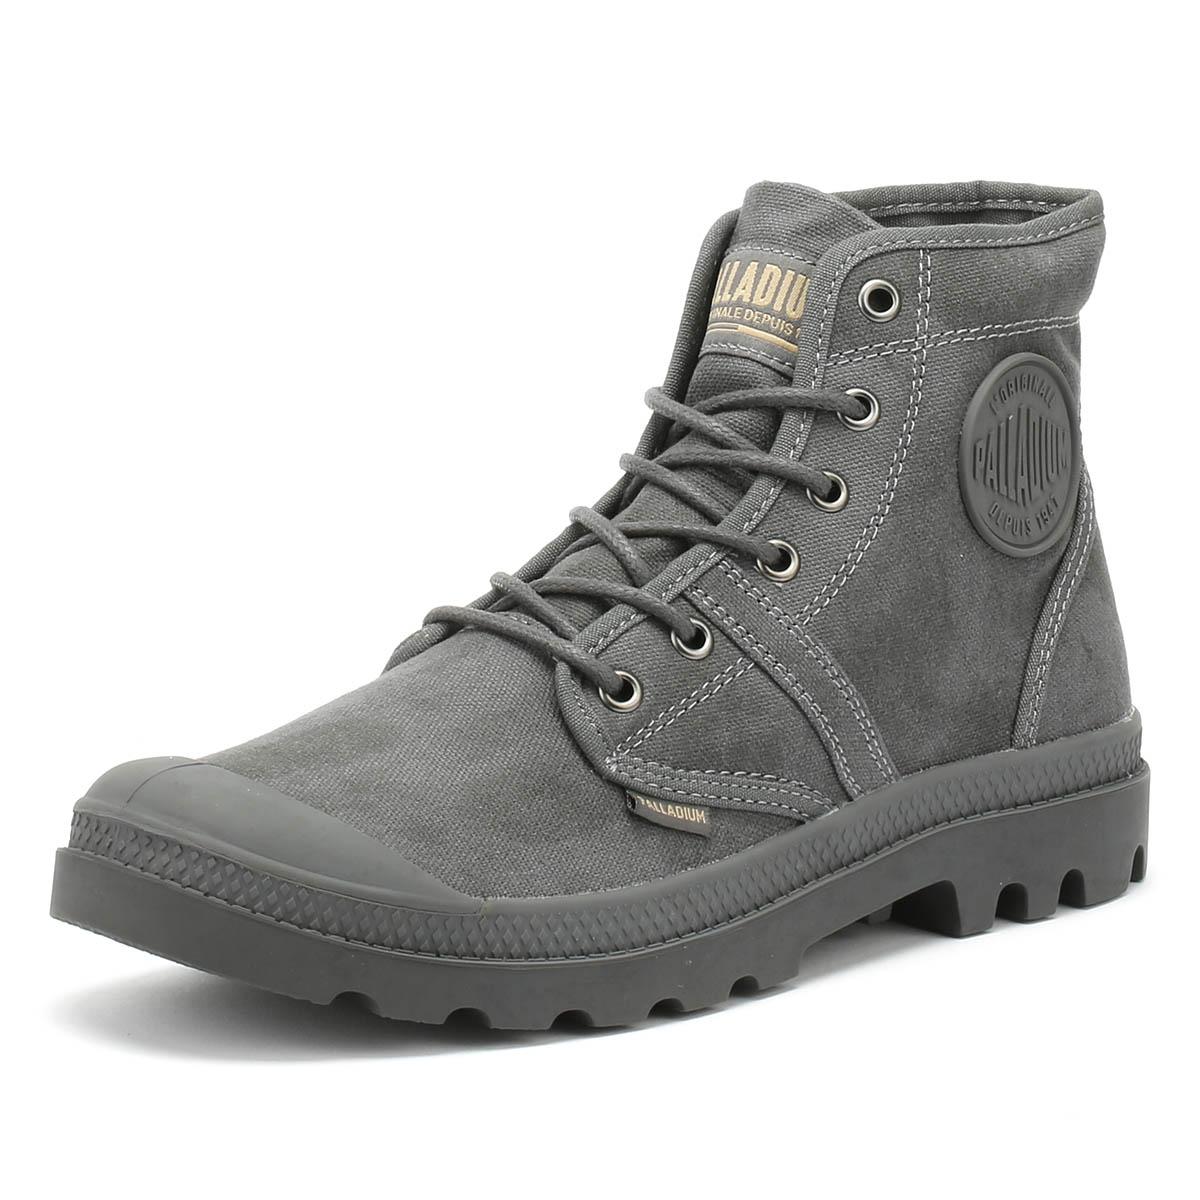 Palladium Canvas Pallabrousse Wax Mens Grey Boots in Gray for Men - Lyst